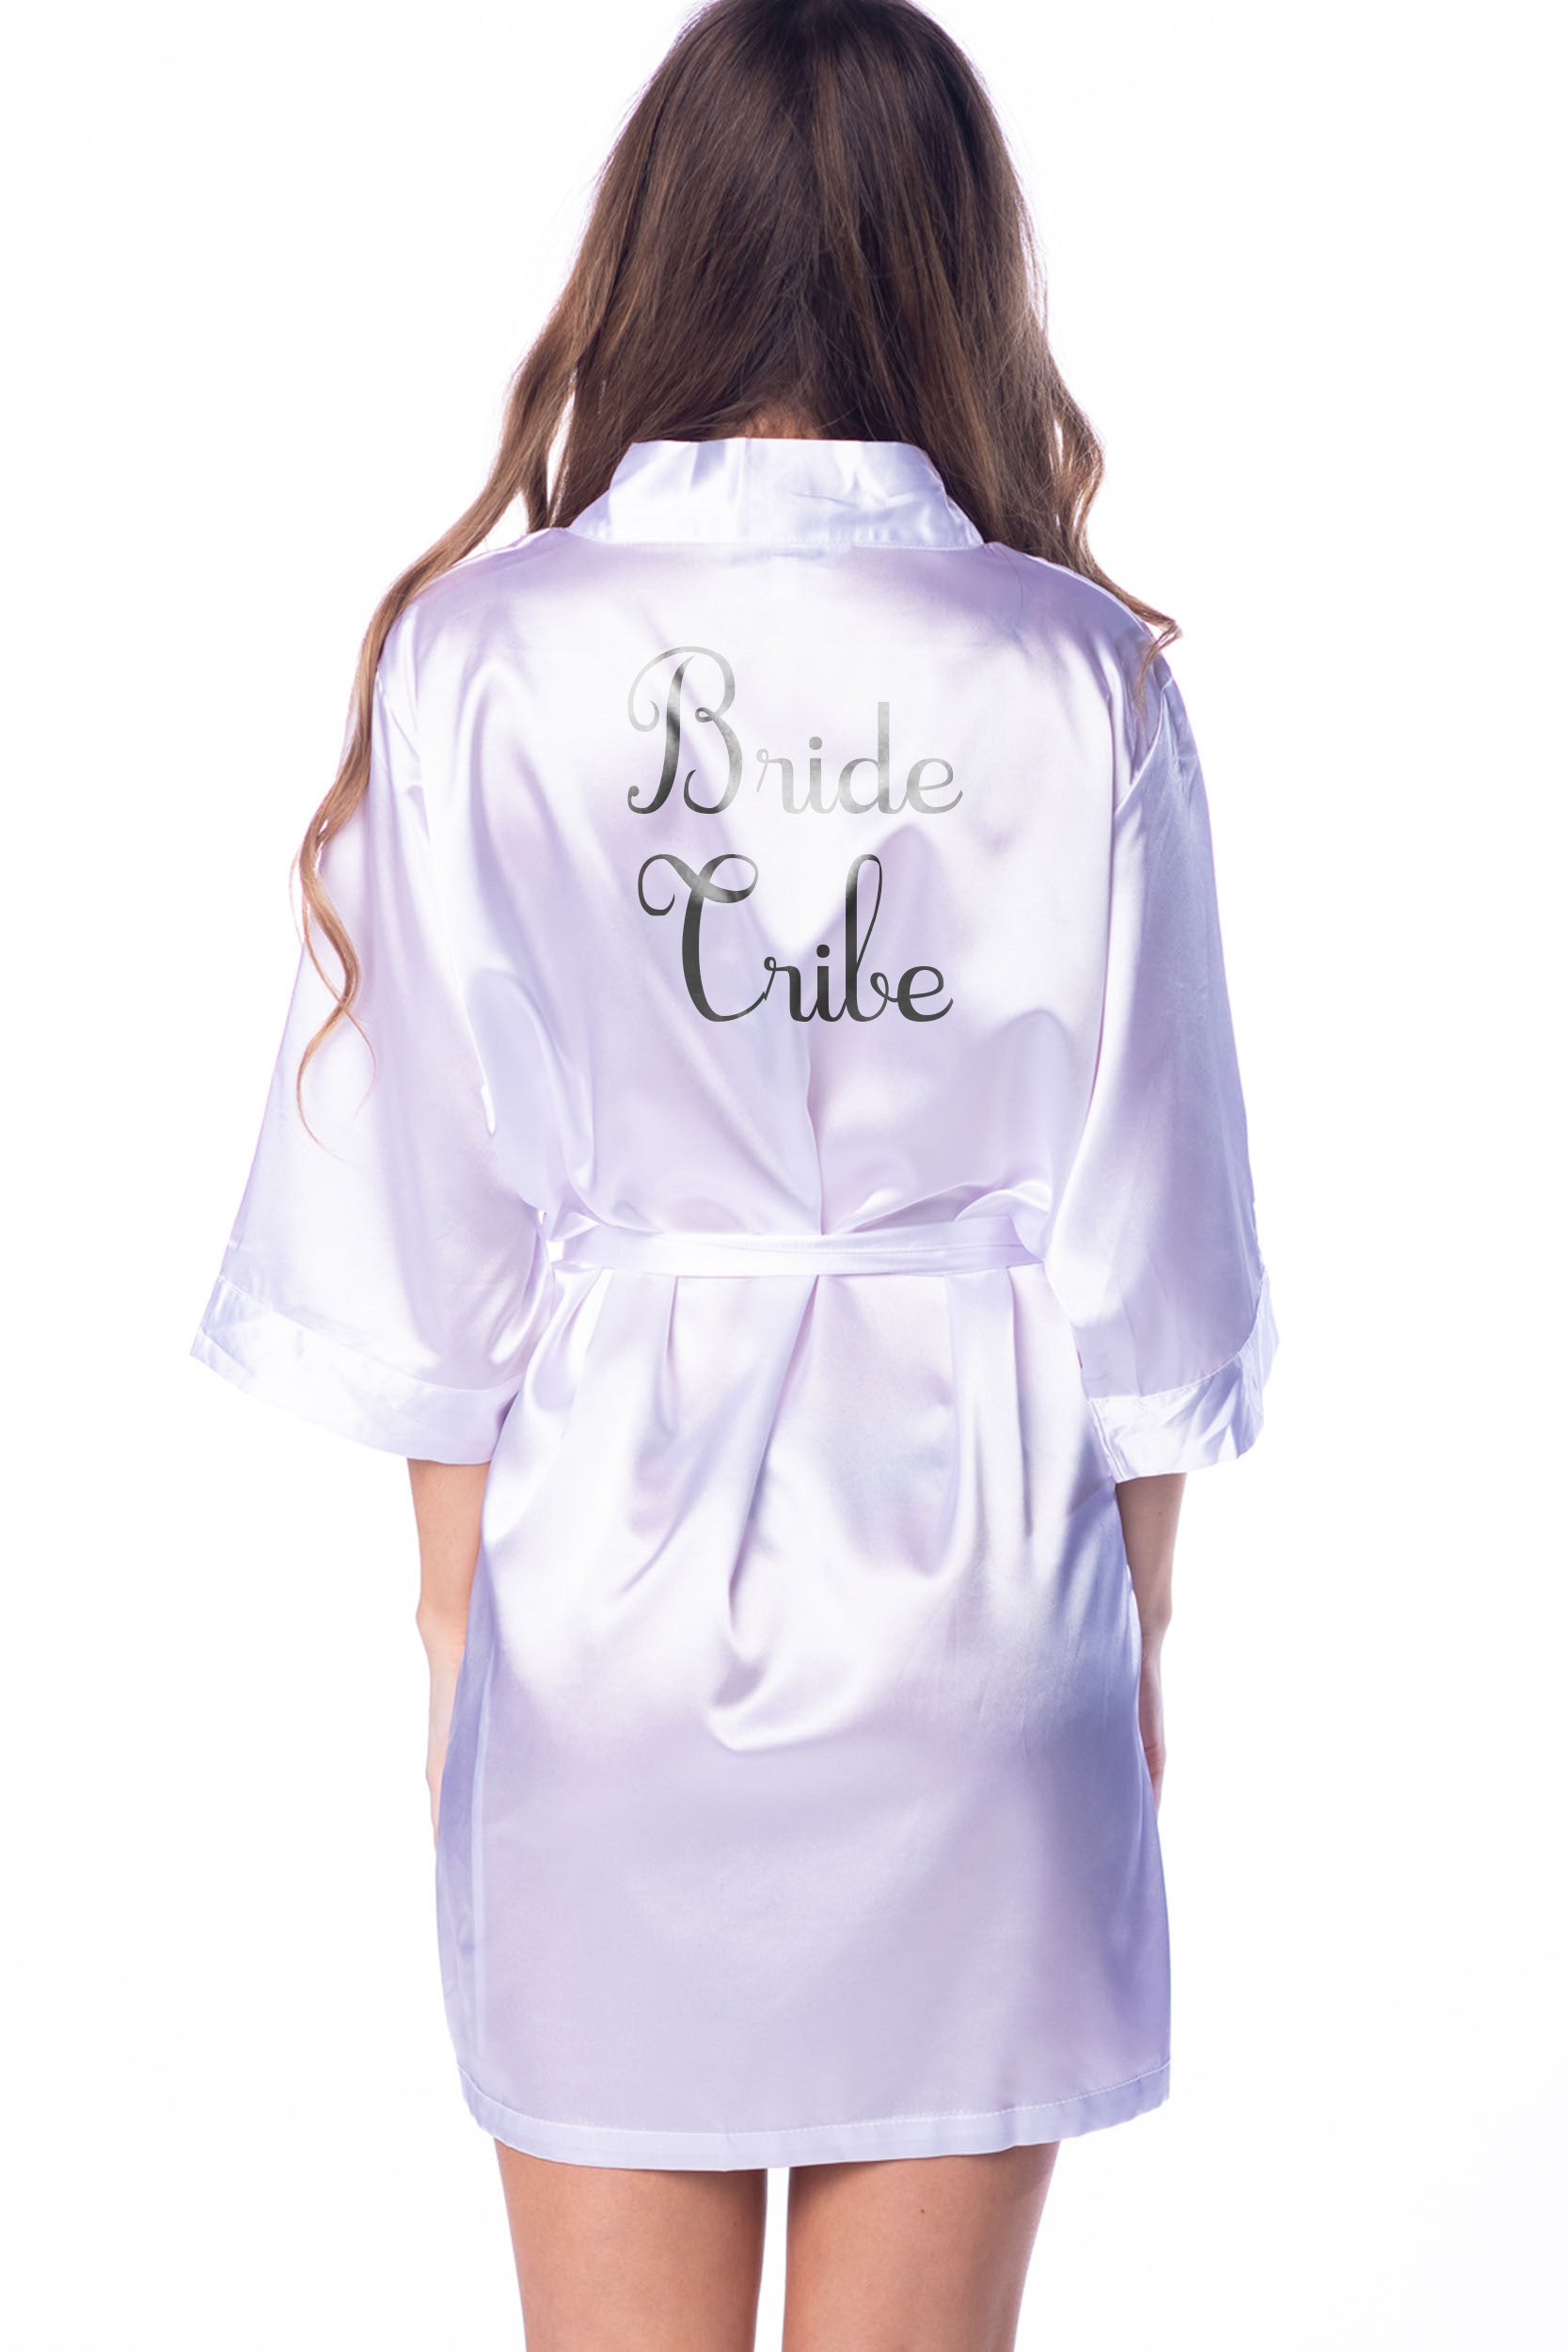 S/M "Bride Tribe" Lavender Satin Robe - Cursif in Metal Silver (Clearance Item)